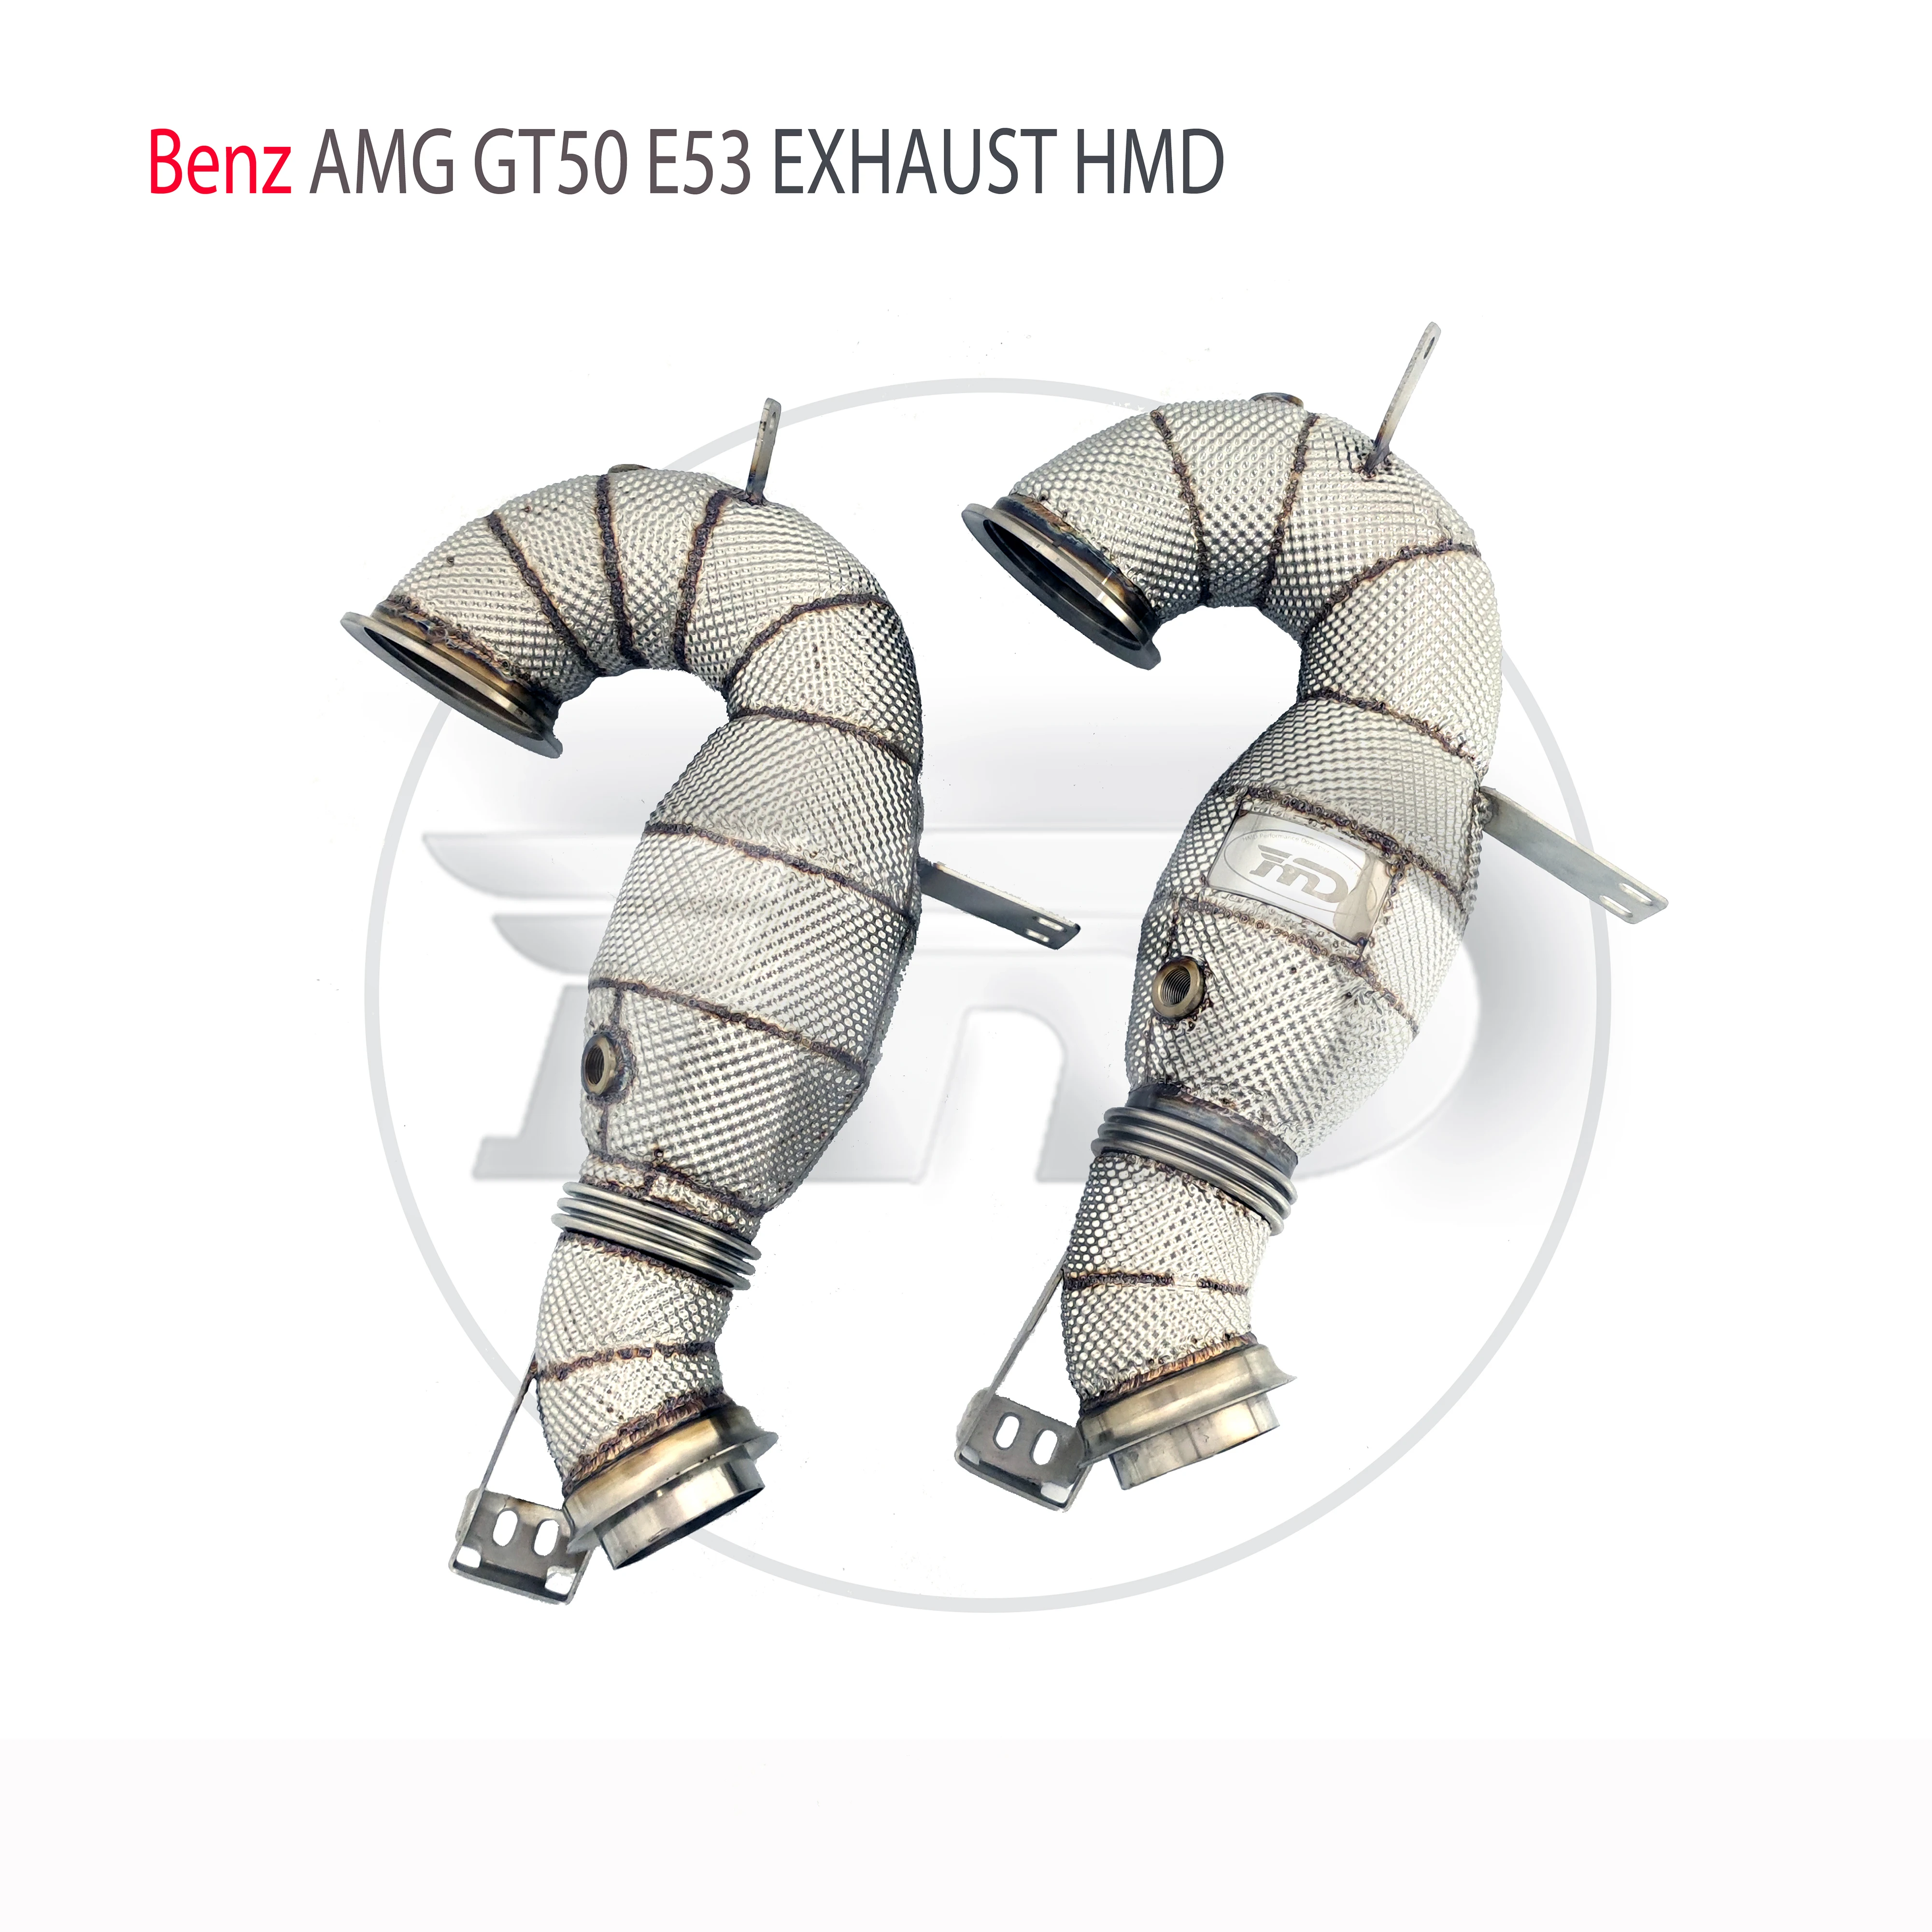 

HMD Exhaust Manifold High Flow Downpipe for Benz ANG GT50 E53 Car Accessories With Catalytic Header Without Cat Catless Pipe